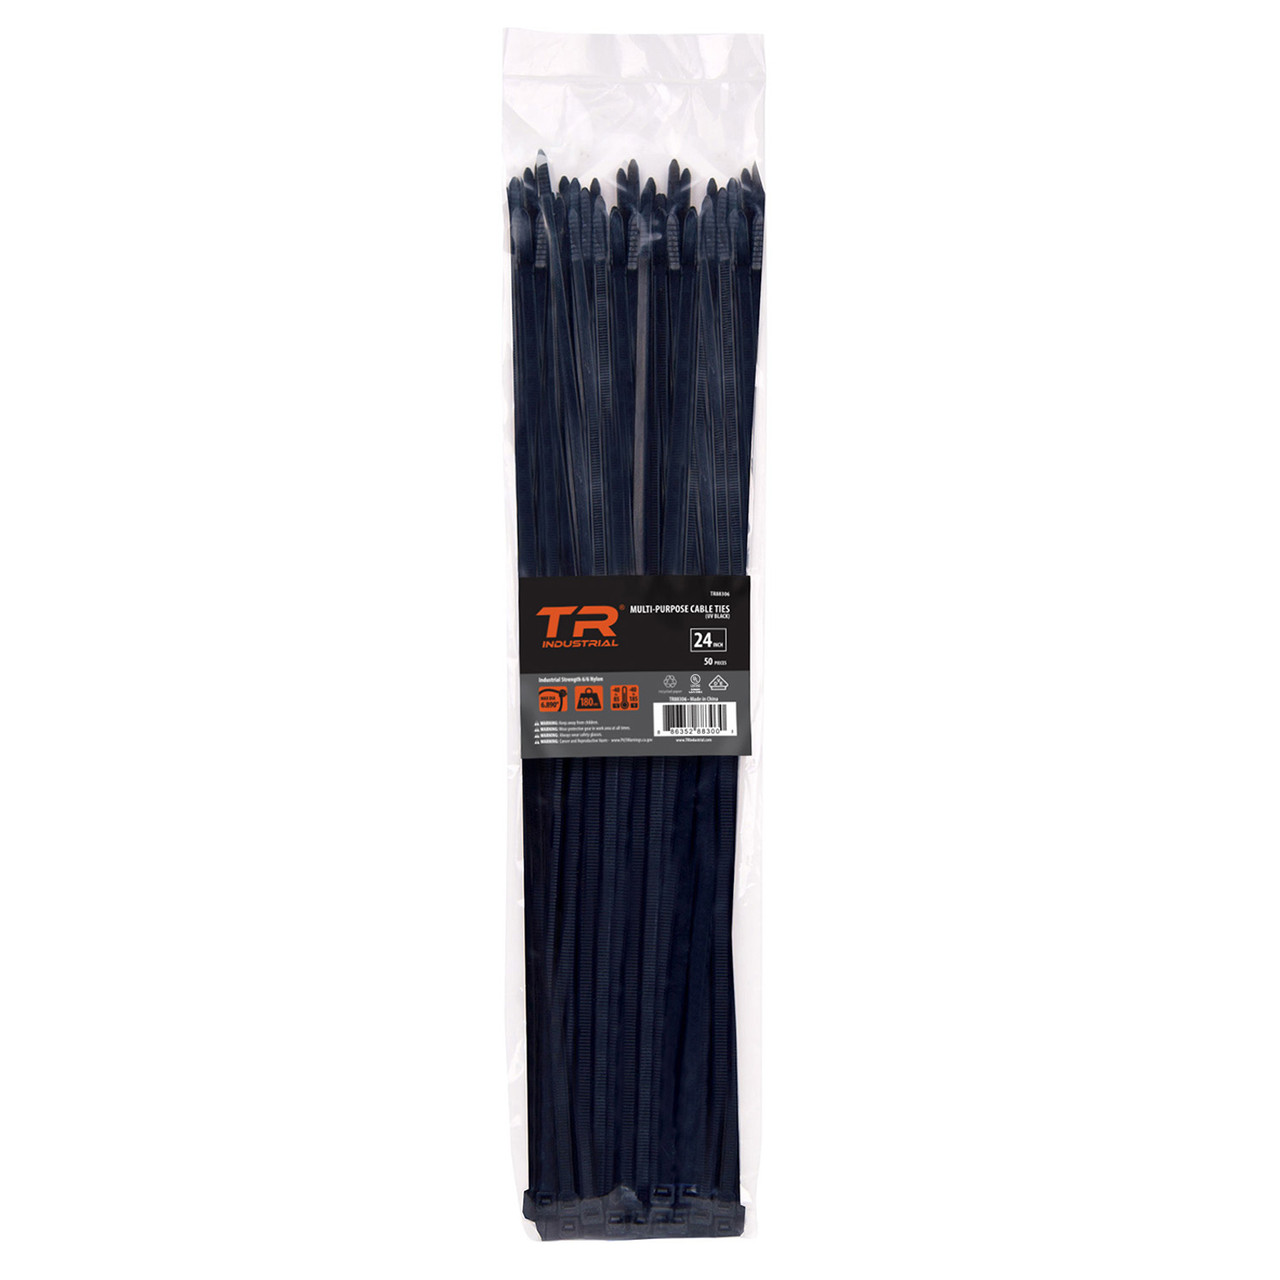 TR Industrial Multi-Purpose UV Resistant Black Cable Ties, 24 inches, 50 Pack